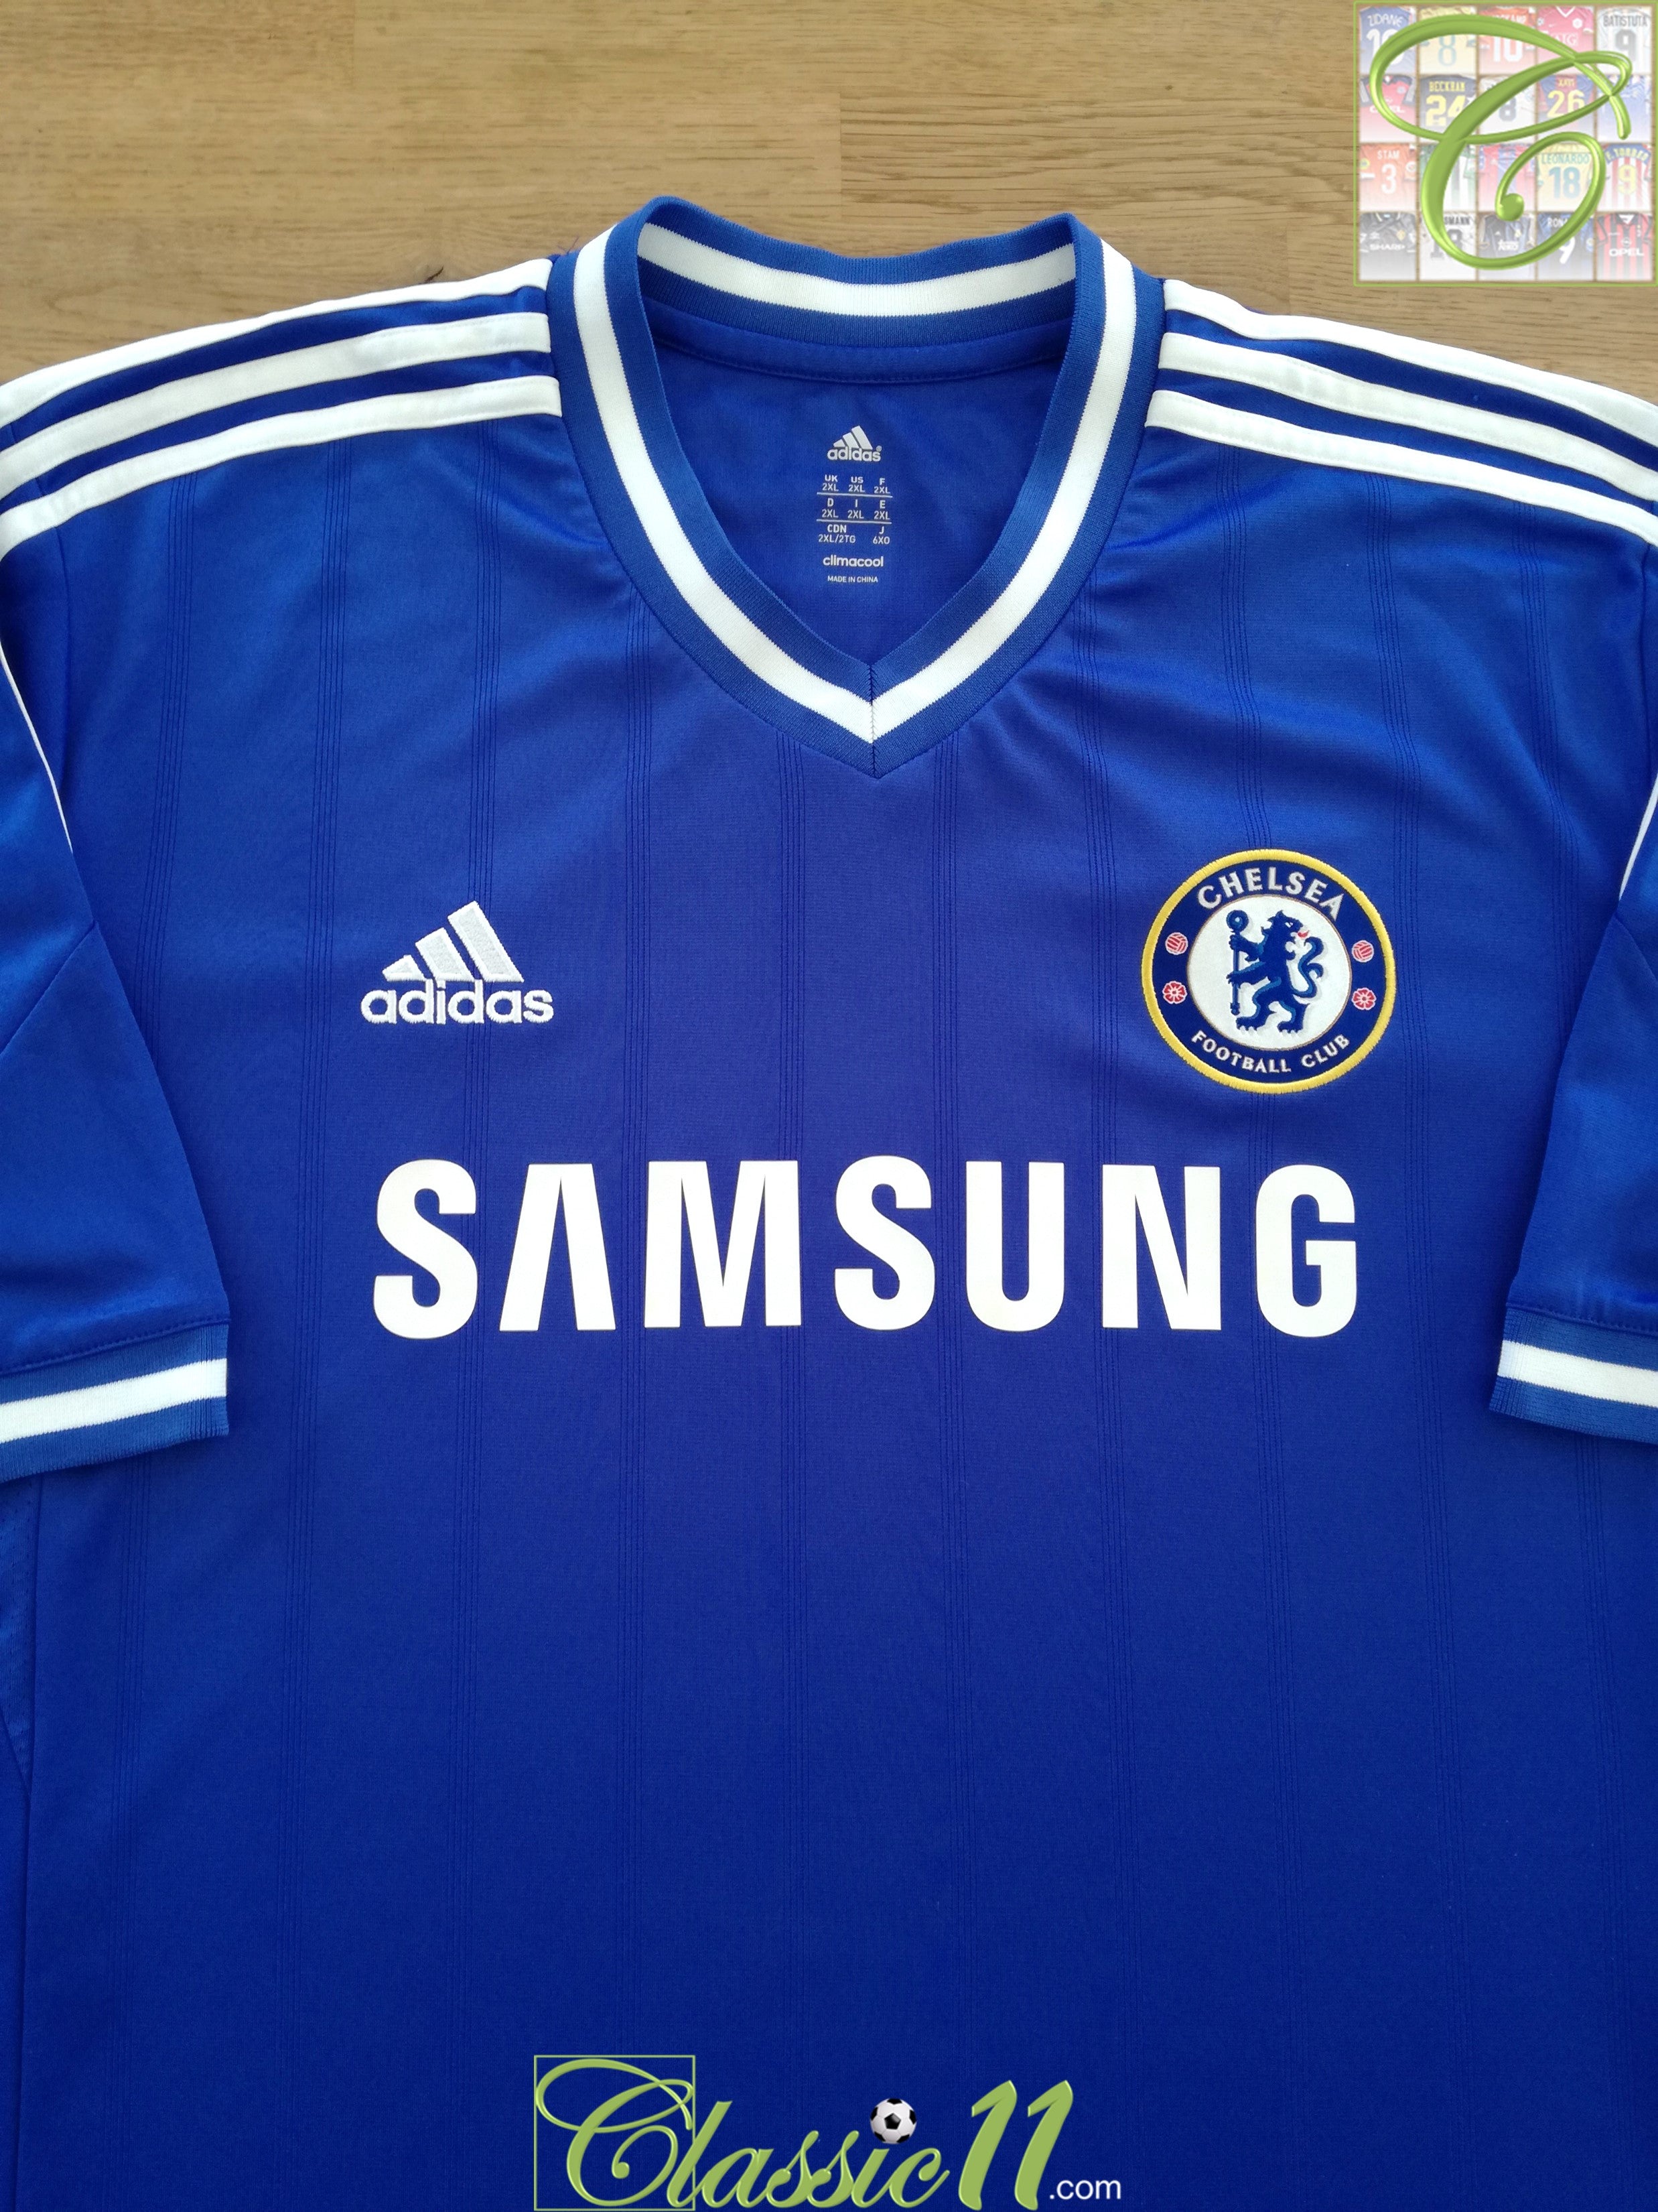 2013/14 Chelsea Home Football Shirt / Classic Old Soccer Jersey ...